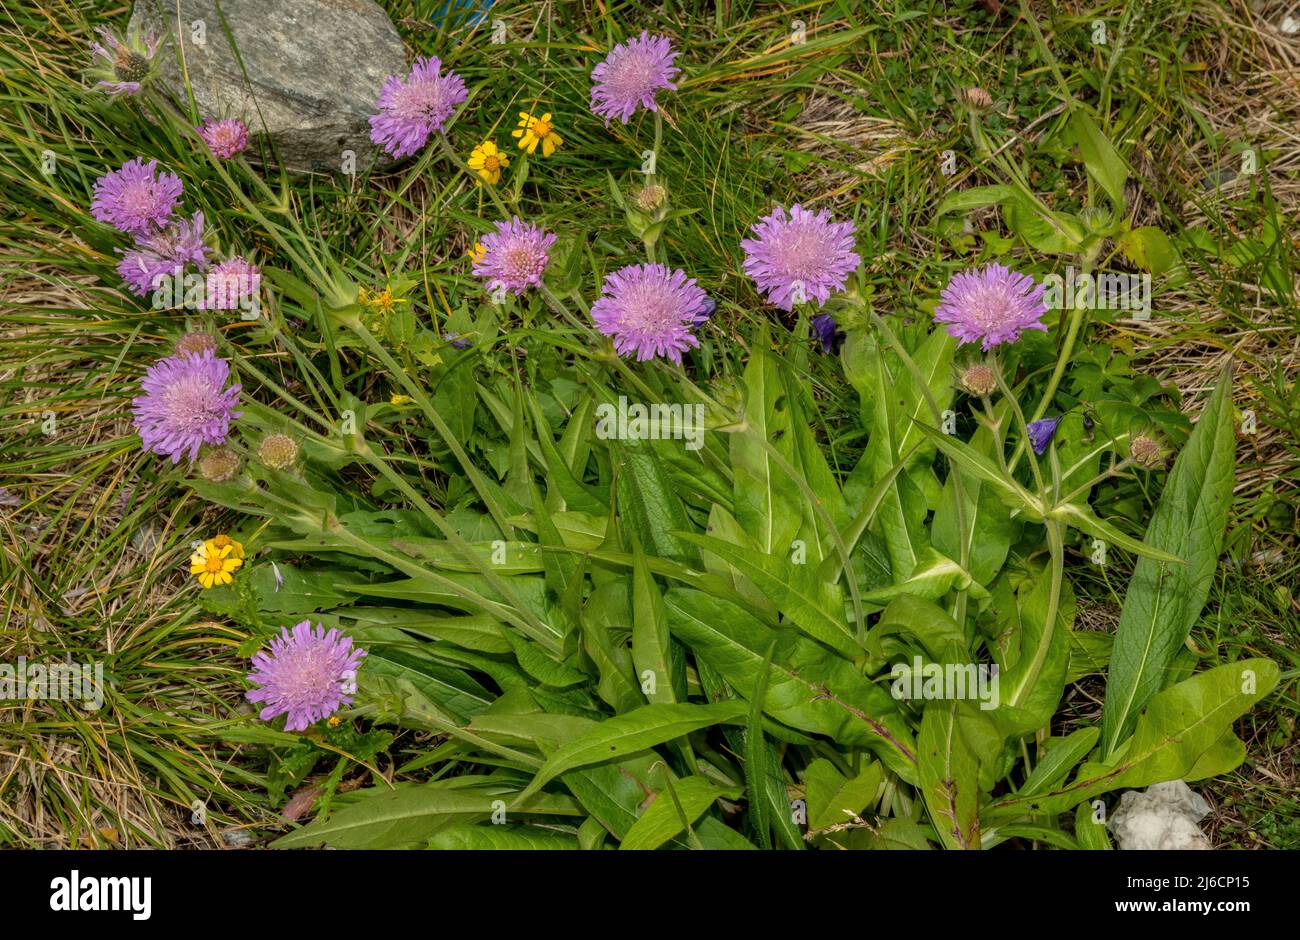 A form of Wood Scabious, Knautia dipsacifolia subsp. lancifolia in flower in the Carpathians. Stock Photo